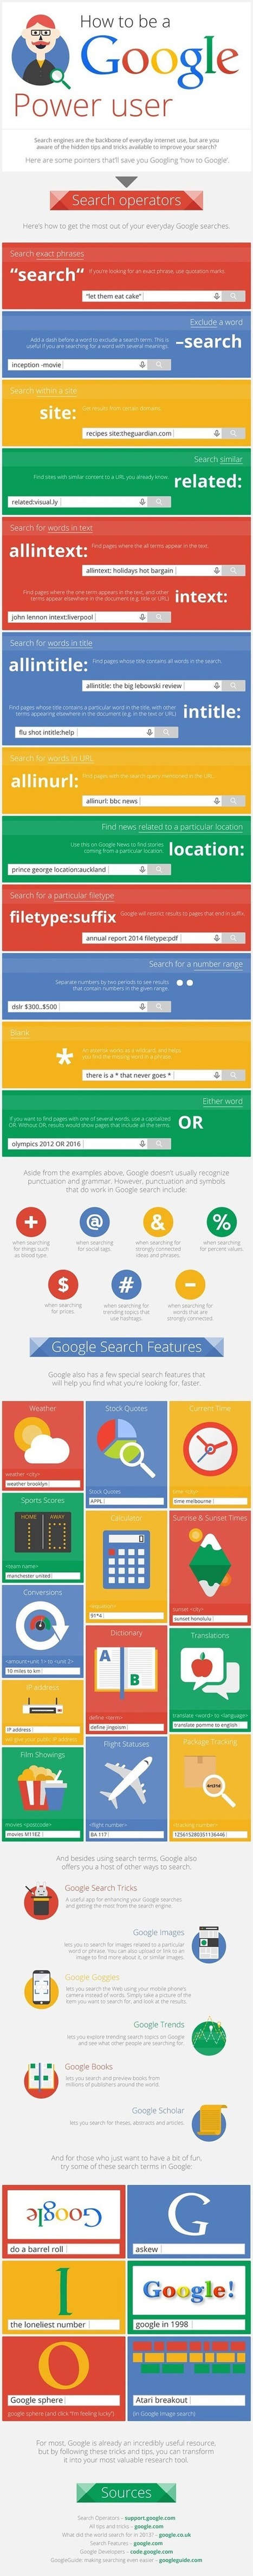 46 Hidden Tips and Tricks to Use Google Search Like a Boss: Infographic | 21st Century Learning and Teaching | Scoop.it